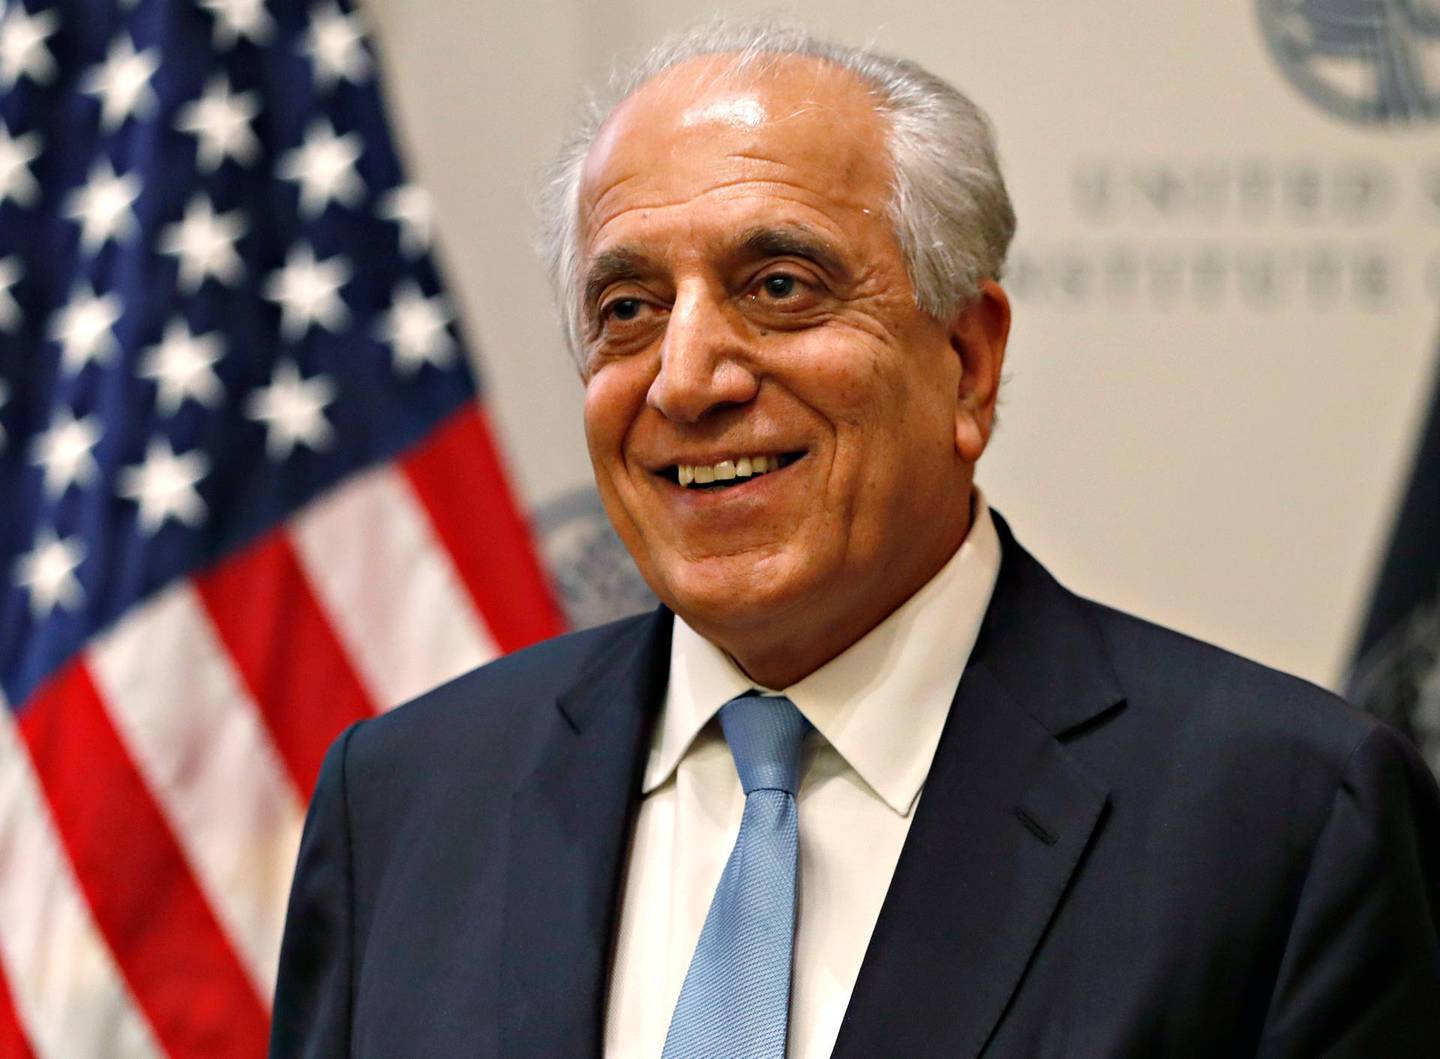 FILE - In this Feb. 8, 2019, file photo, Special Representative for Afghanistan Reconciliation Zalmay Khalilzad at the U.S. Institute of Peace, in Washington.  A fresh round of talks between the U.S. and the Taliban is to begin in Qatar Saturday, June 29, just days after U.S. Secretary of State Mike Pompeo said Washington is hoping for an Afghan peace agreement before Sept. 1. (AP Photo/Jacquelyn Martin, File)